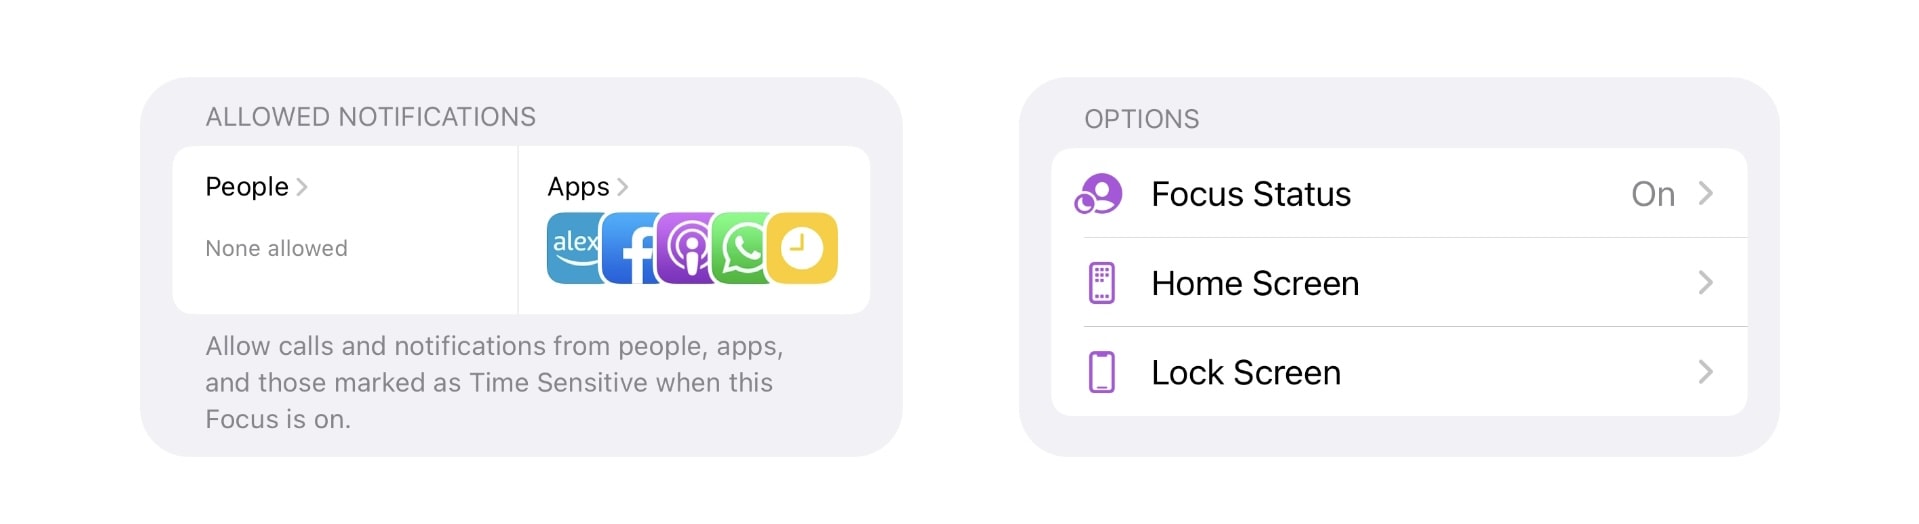 Create and customize Focus modes in iOS 15